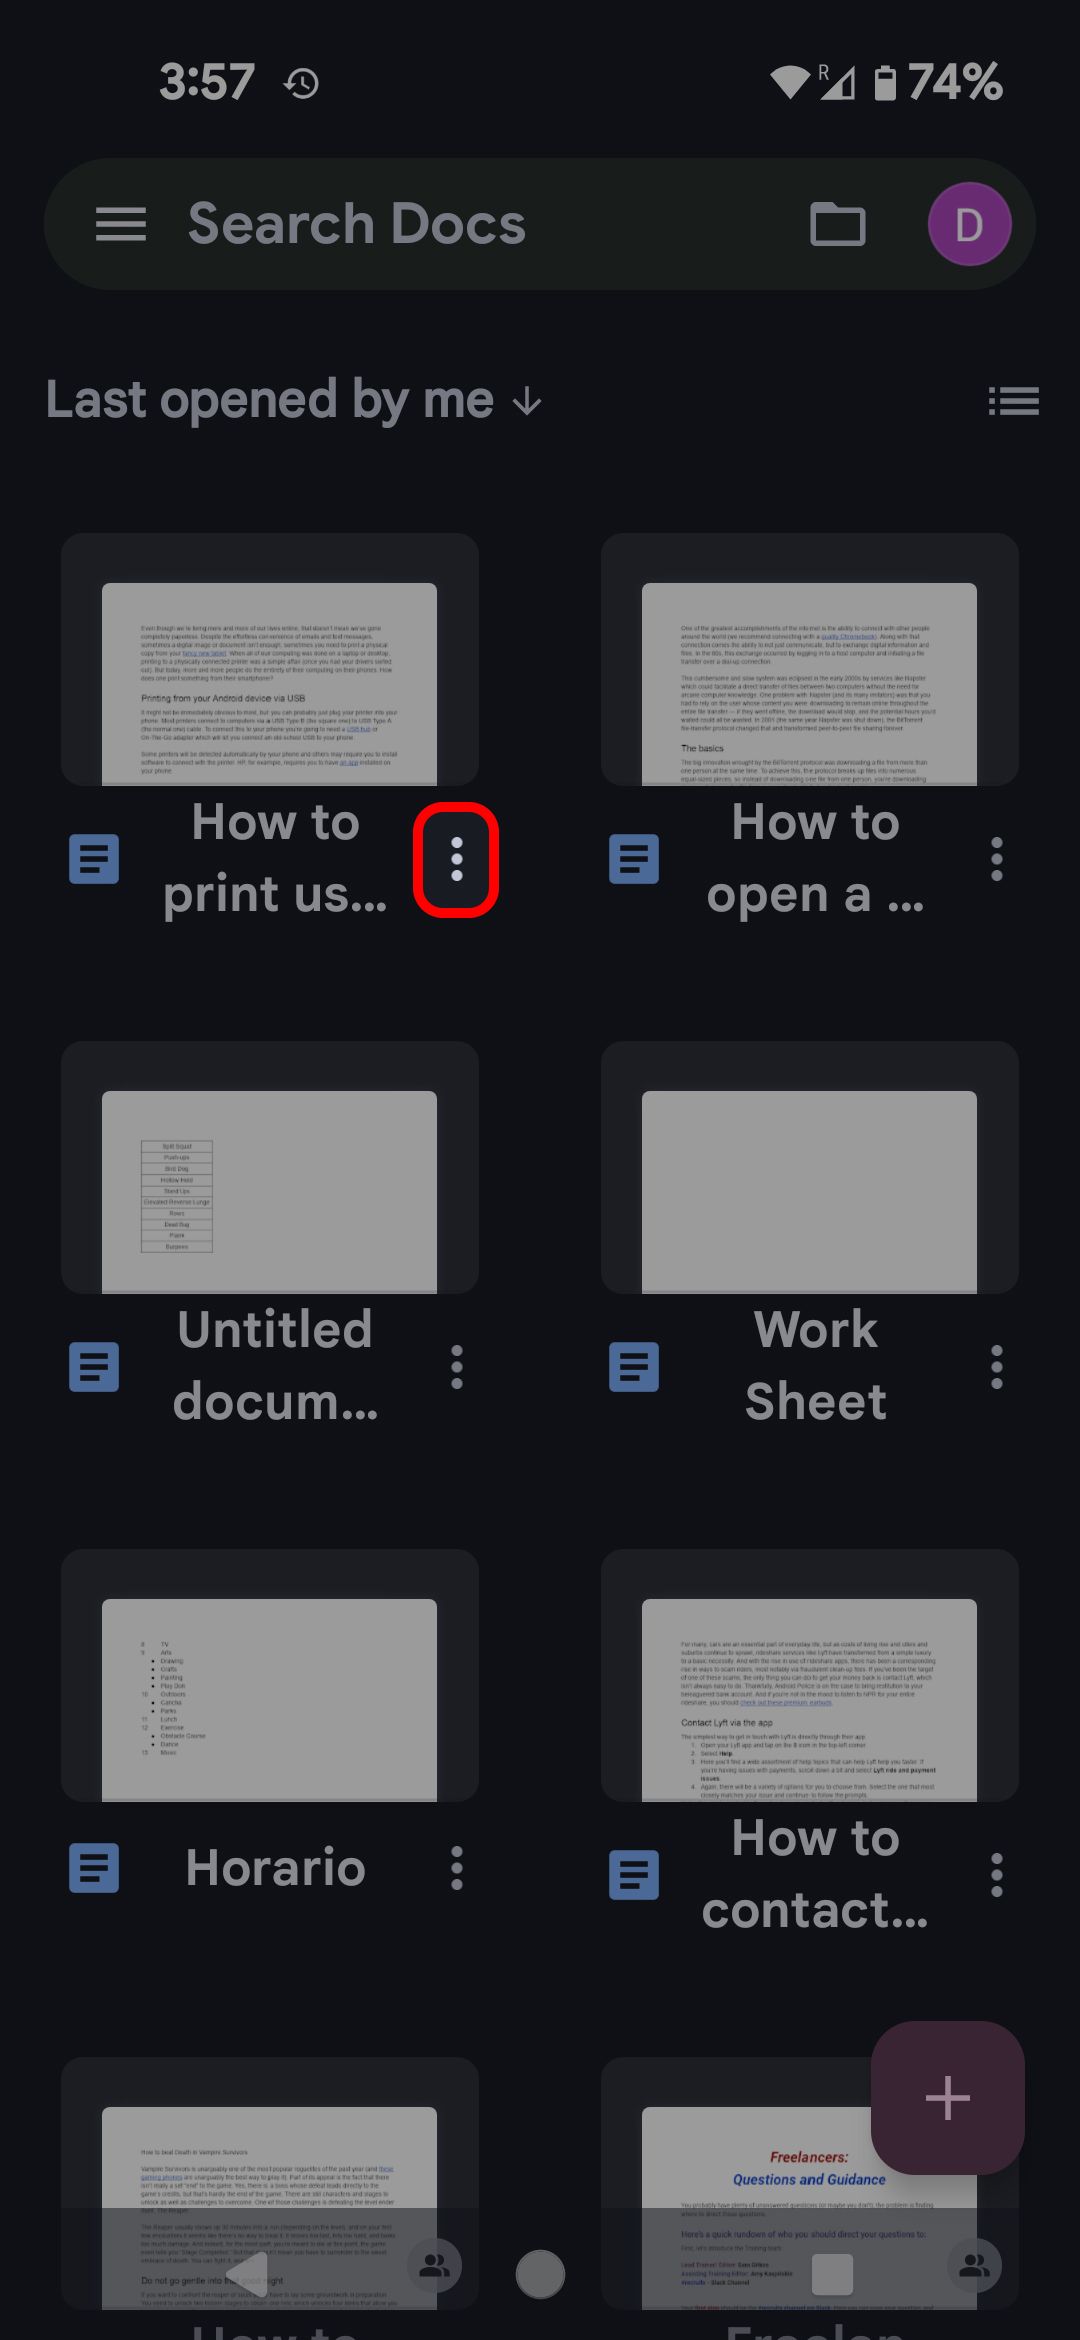 Google Docs home screen highlighing the document options icon